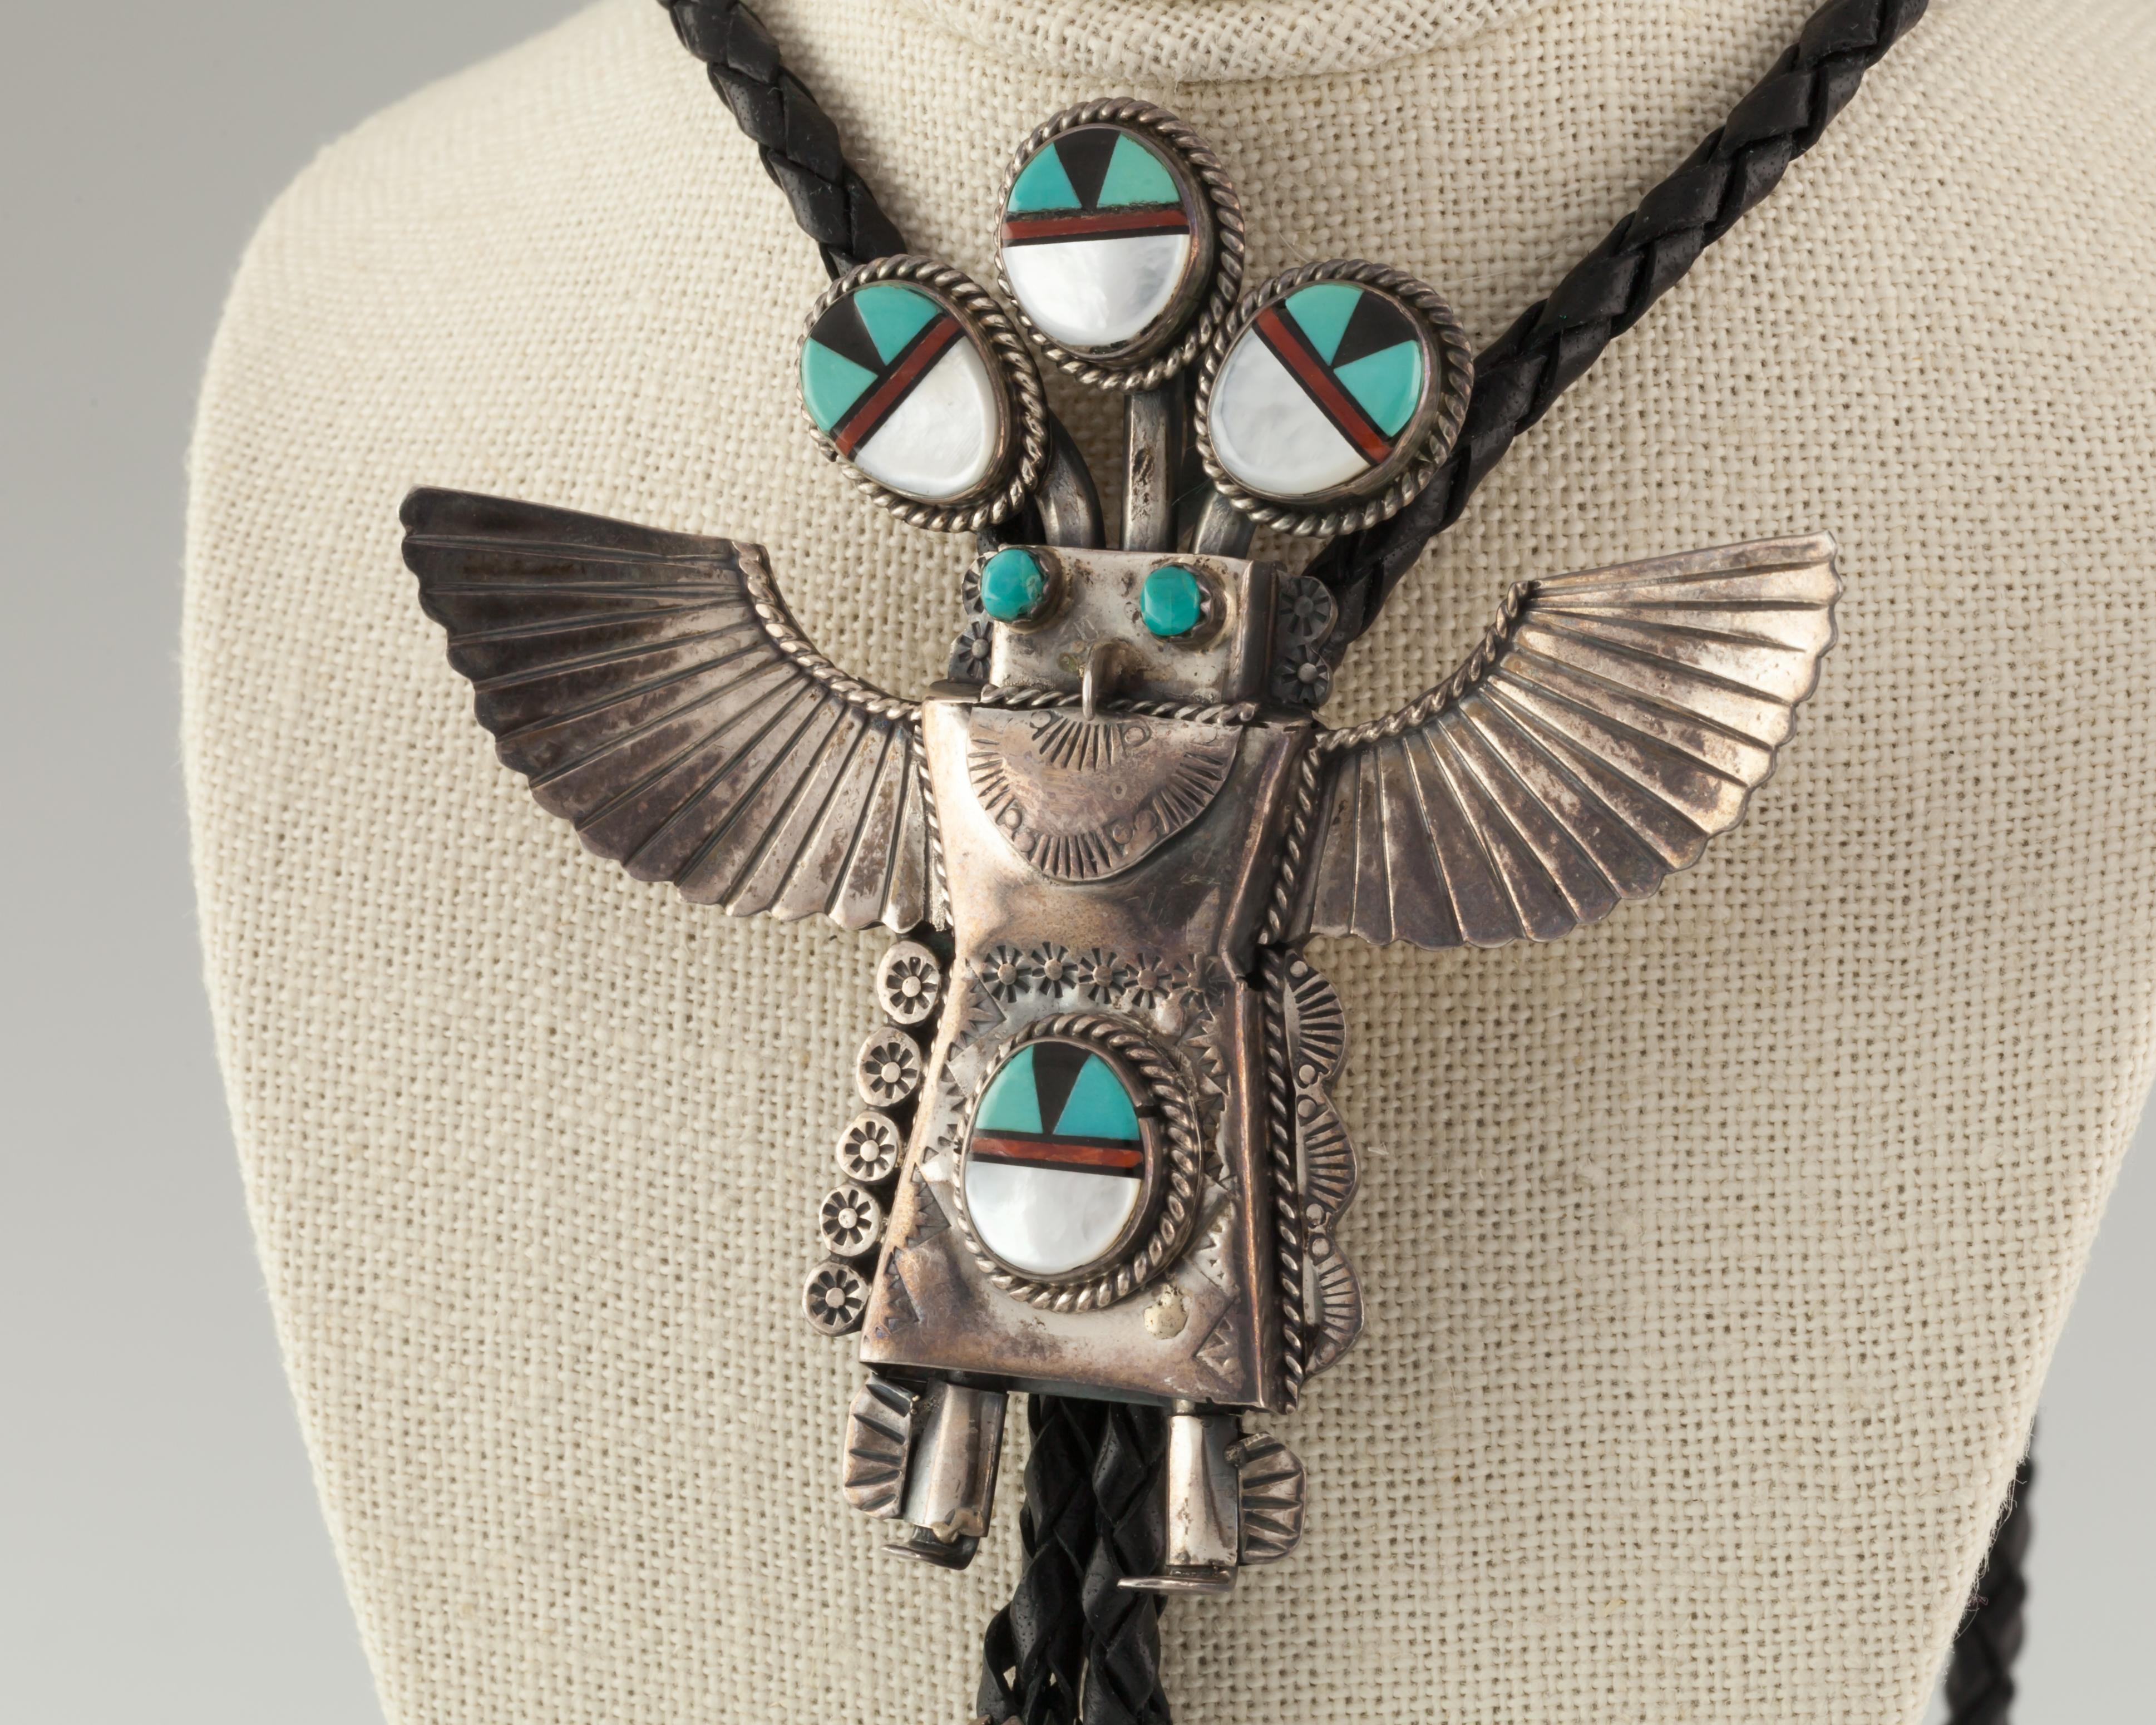 Zuni Kachina Sterling Silver & Turquoise Inlay Handcrafted Leather Bolo Tie In Good Condition For Sale In Sherman Oaks, CA